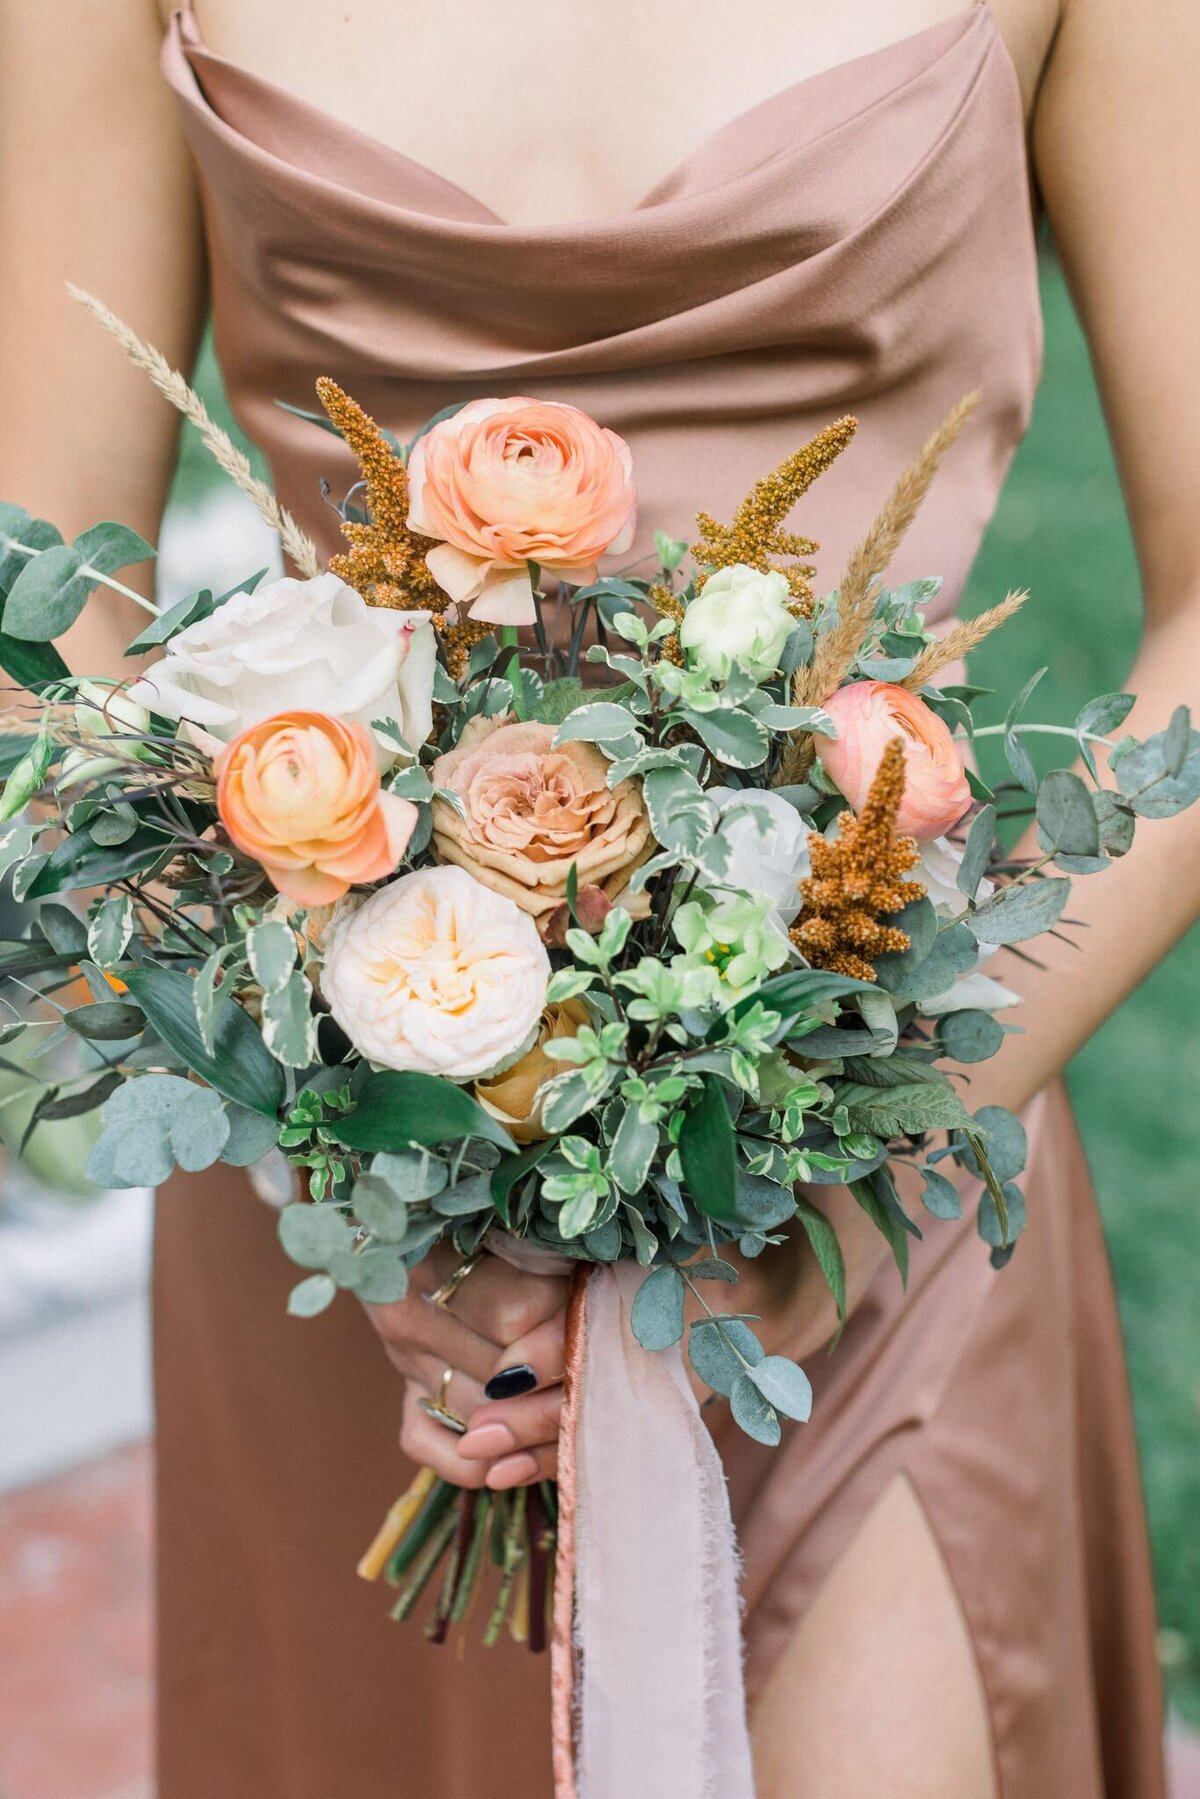 This bouquet designed by Primrose & Petals holds an array of fall colored flowers and green accents.